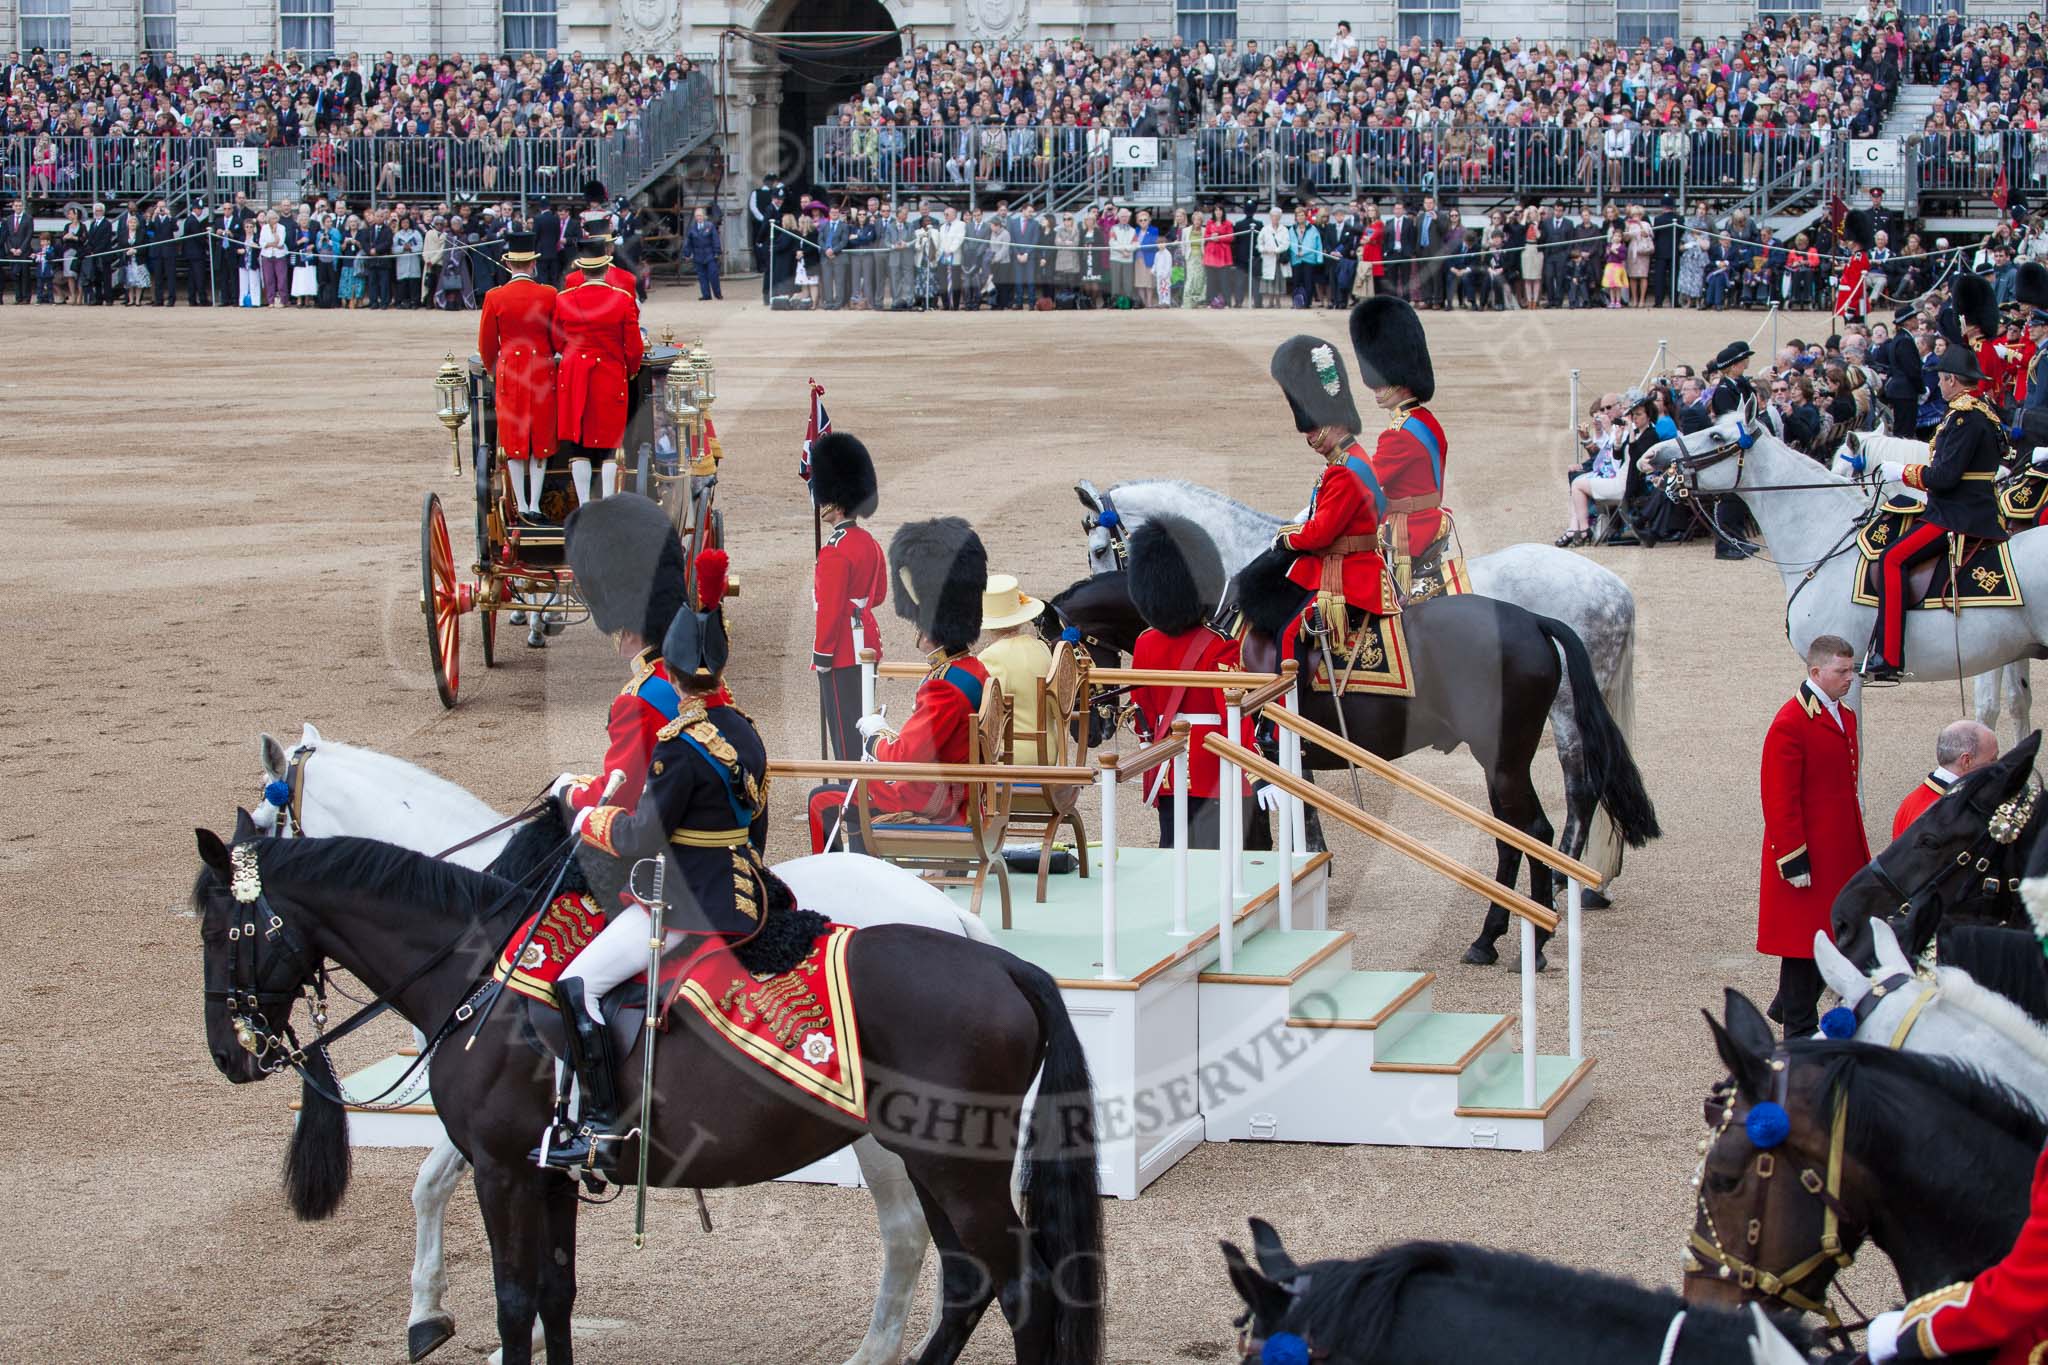 Trooping the Colour 2012: After the Inspection of the Line - the Glass Coach is leaving. In front HRH The Princess Royal and HRH The Duke of Kent, on the right of the saluting base HRH The Prince of Wales, in conversation with GSM B Mott, and HRH The Duke of Cambridge..
Horse Guards Parade, Westminster,
London SW1,

United Kingdom,
on 16 June 2012 at 11:08, image #255